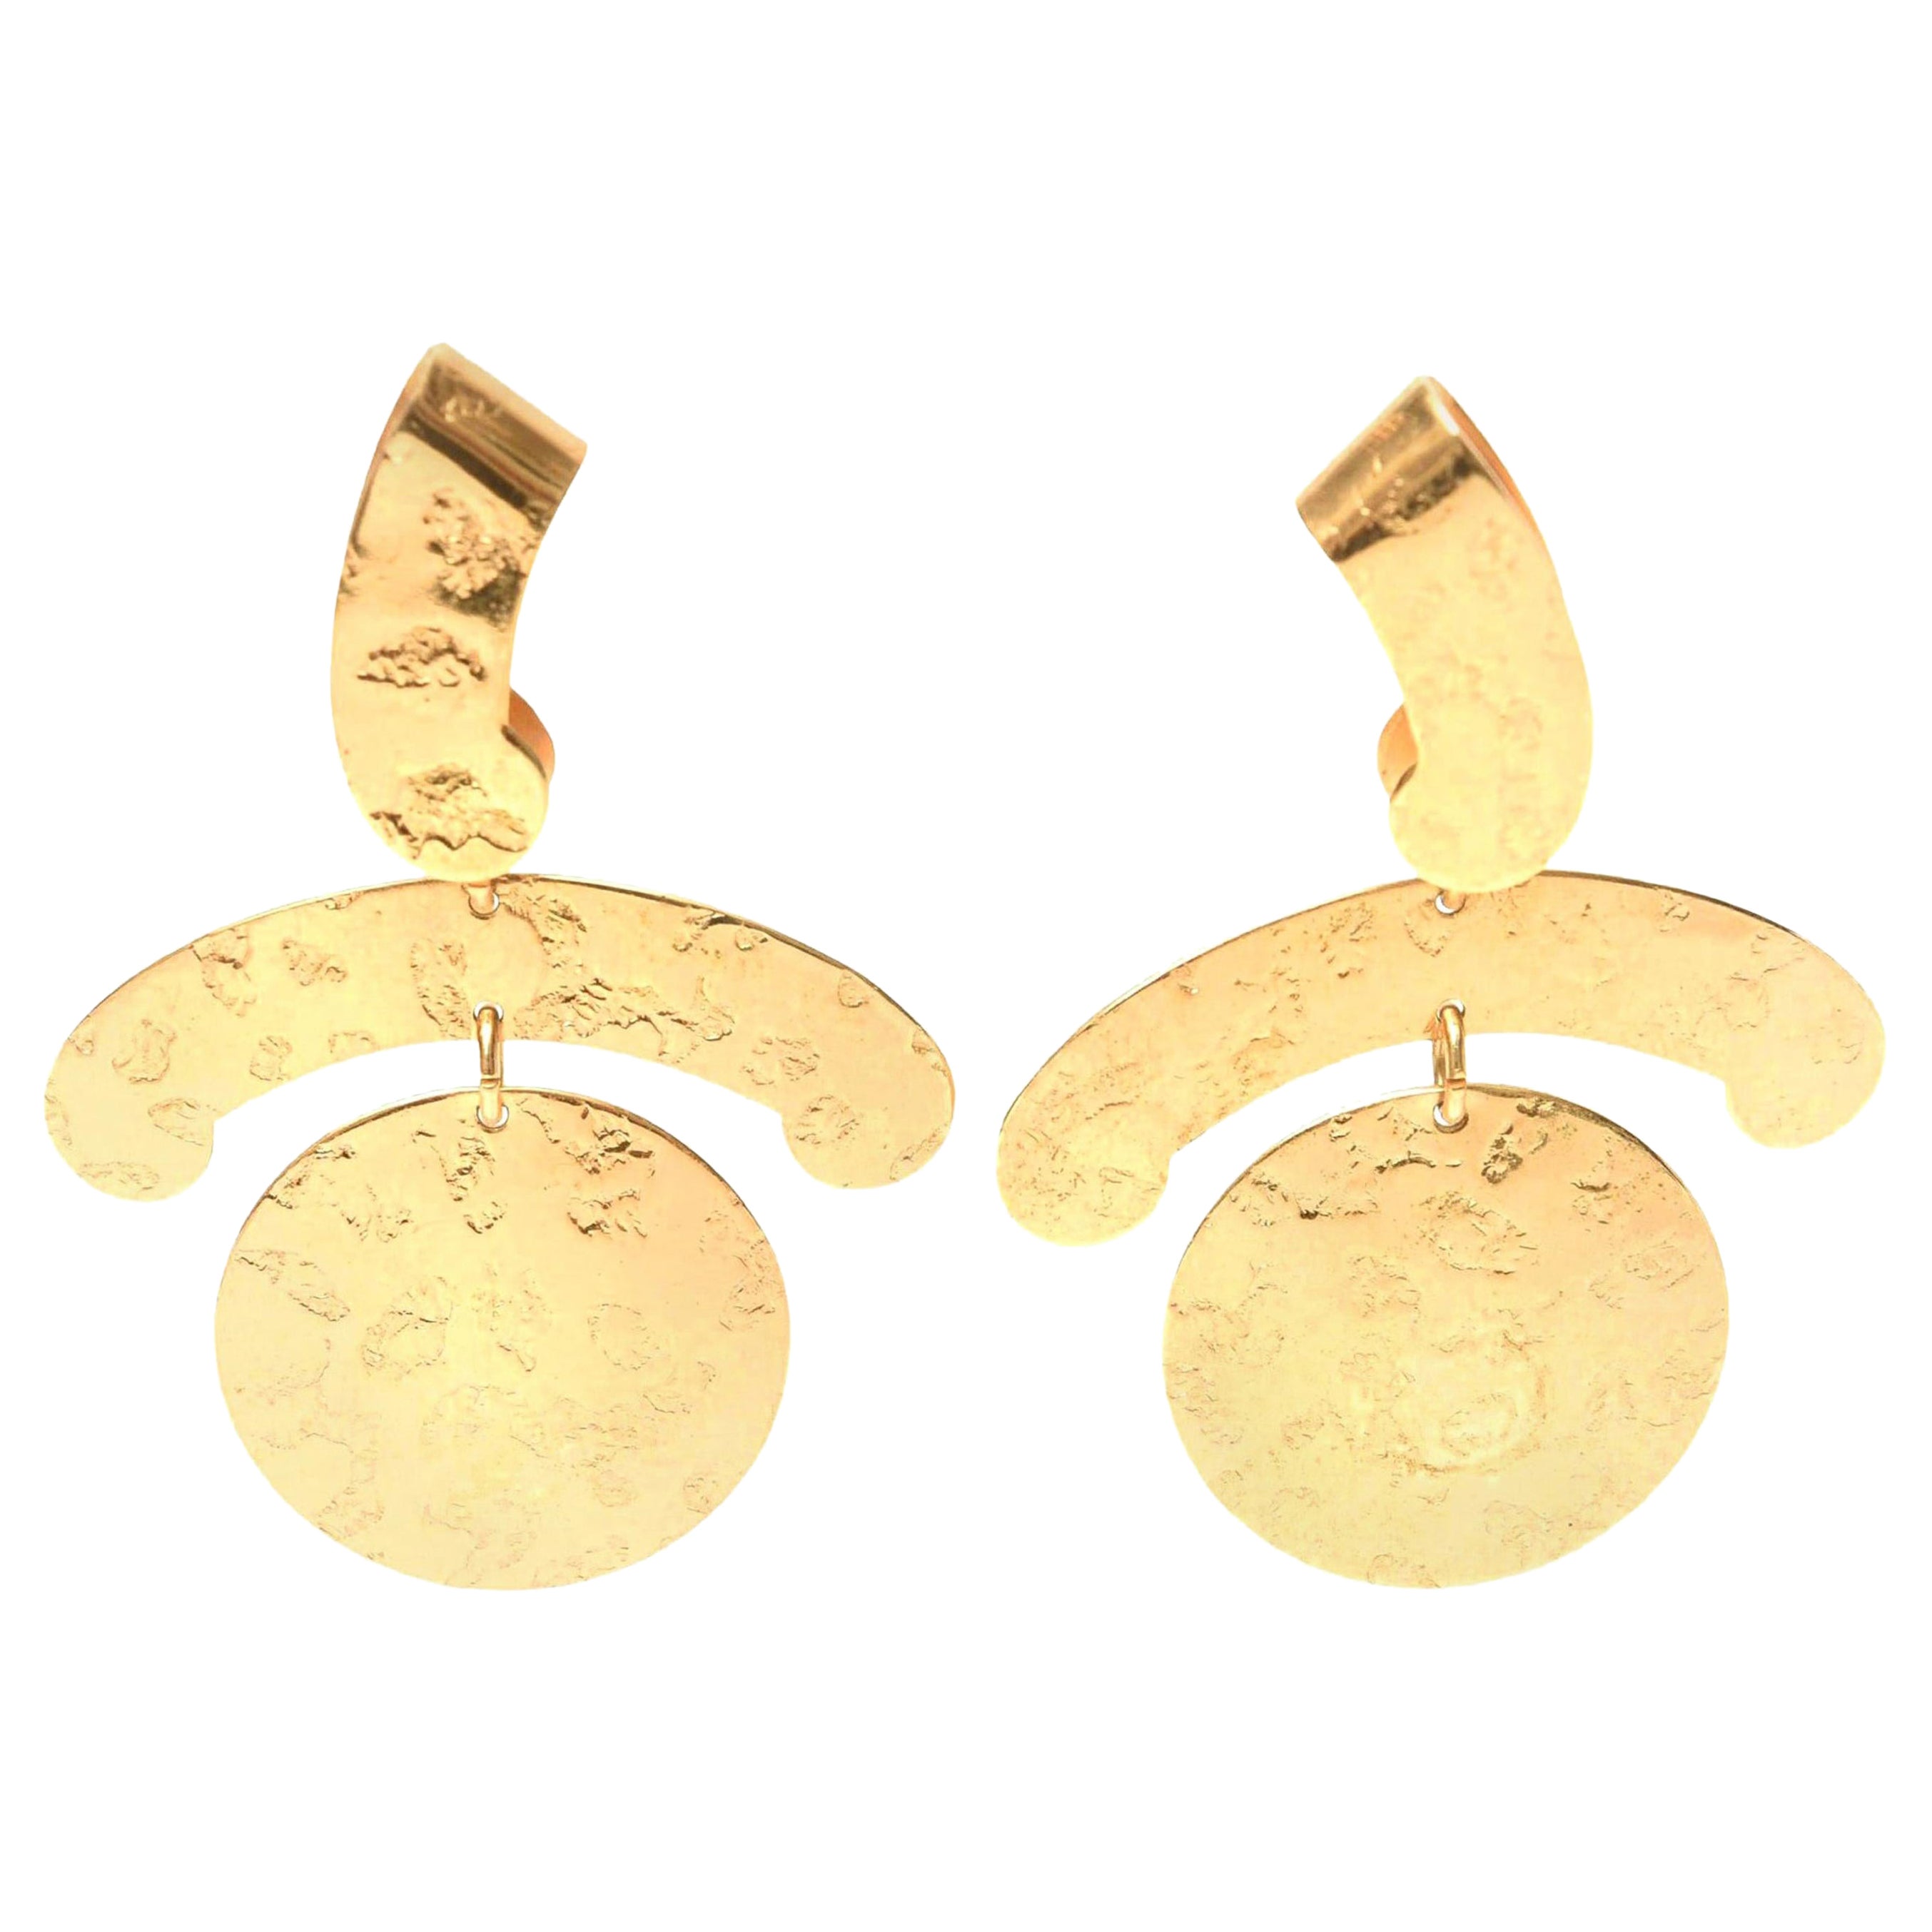  Napier Gold Plated Clip On Sculptural Earrings Vintage